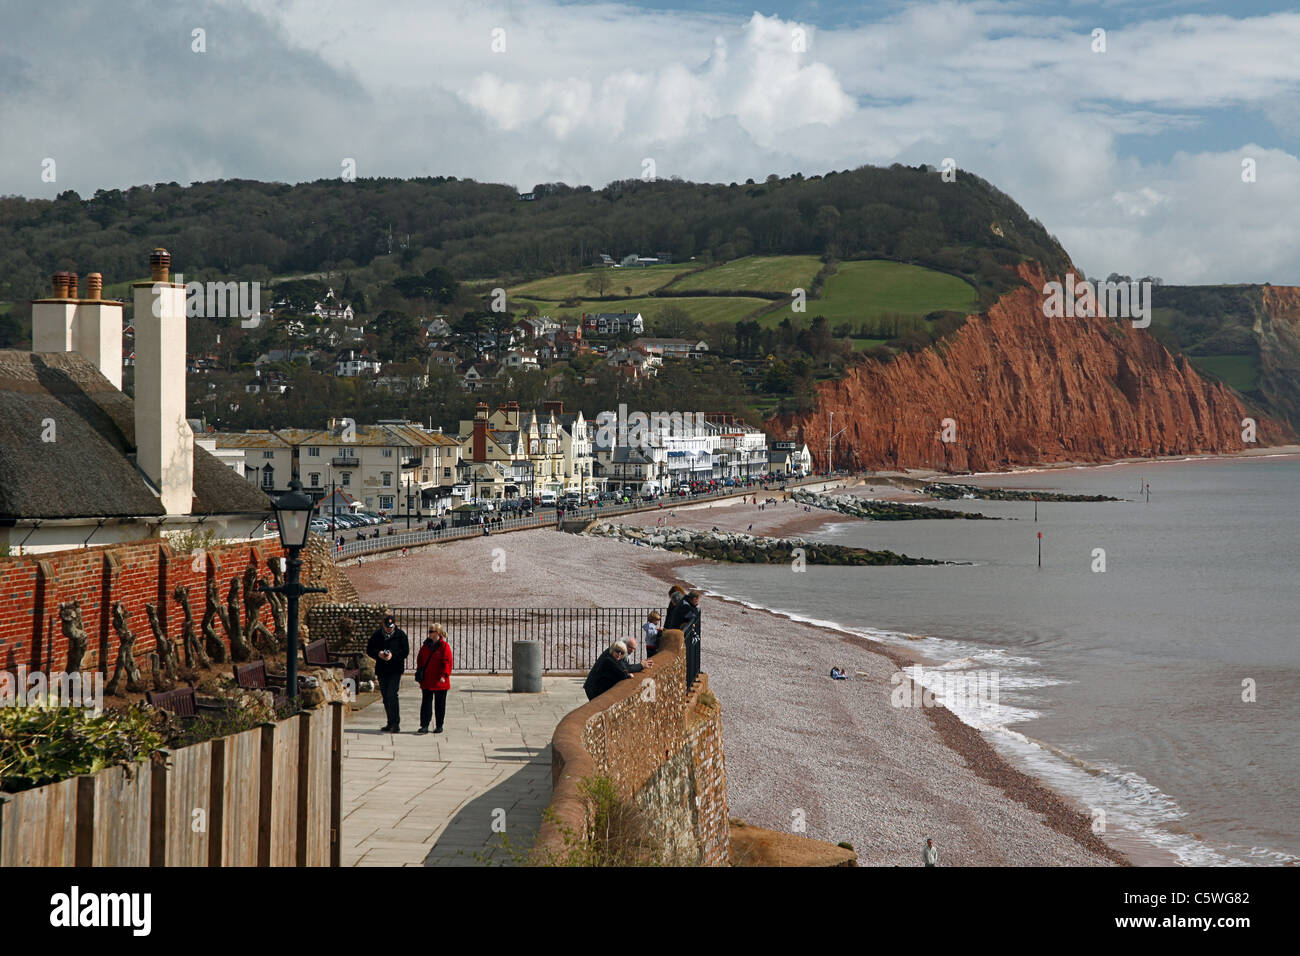 Red sandstone cliffs, forming part of the Jurassic Coast, at Sidmouth, Devon, England, UK Stock Photo